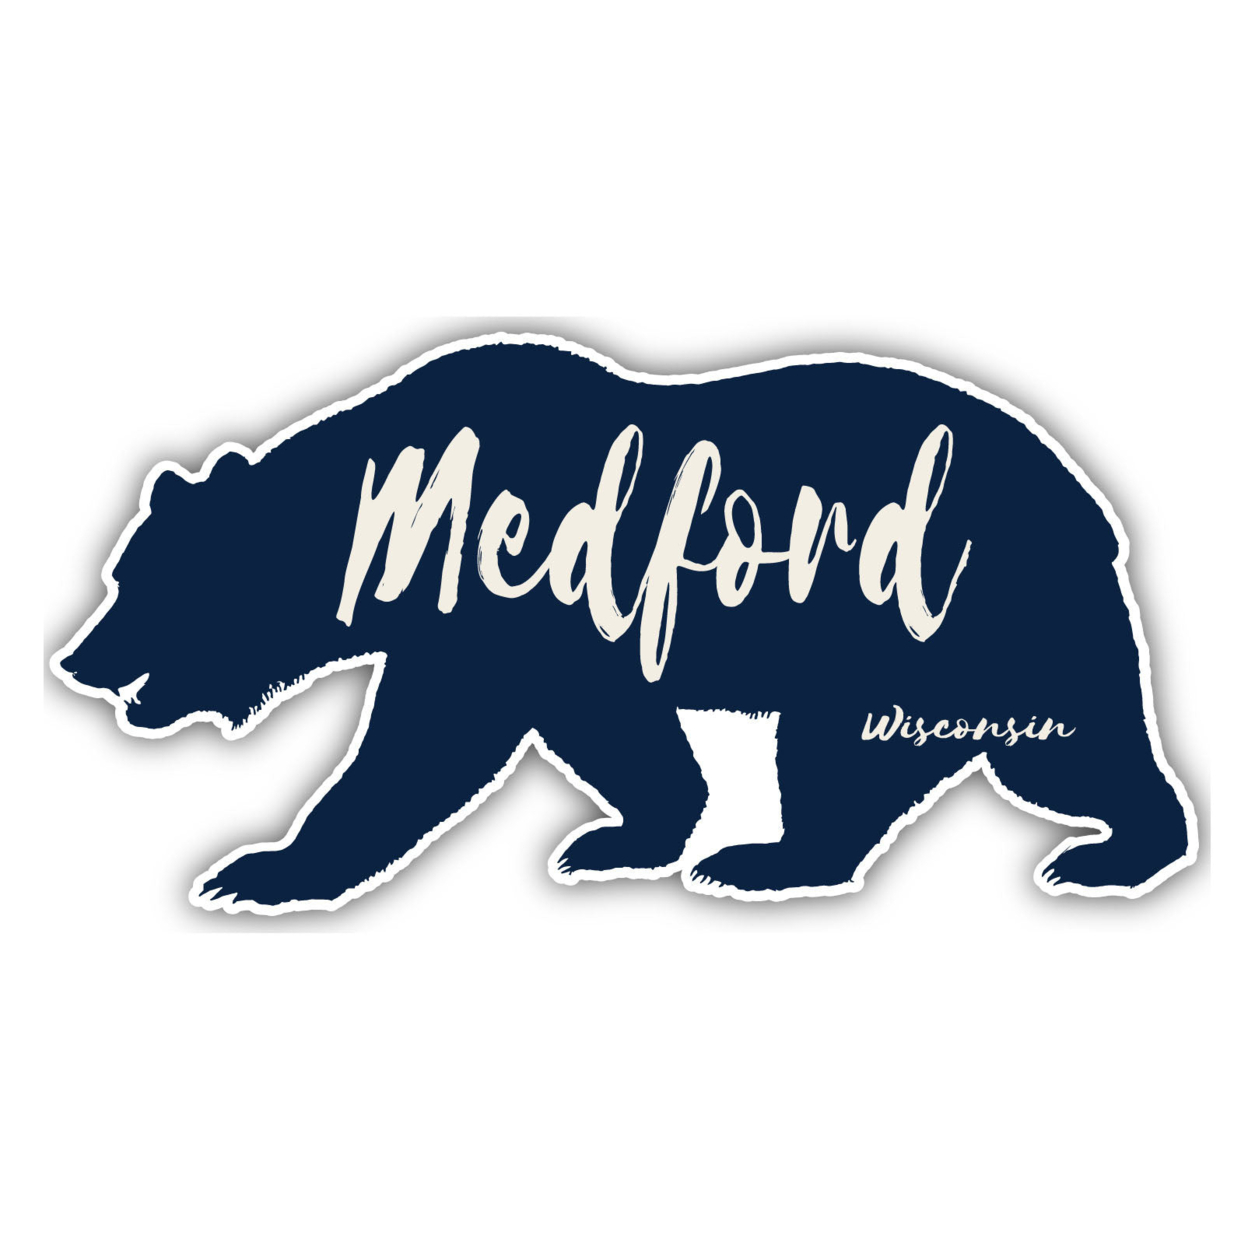 Medford Wisconsin Souvenir Decorative Stickers (Choose Theme And Size) - 4-Inch, Bear